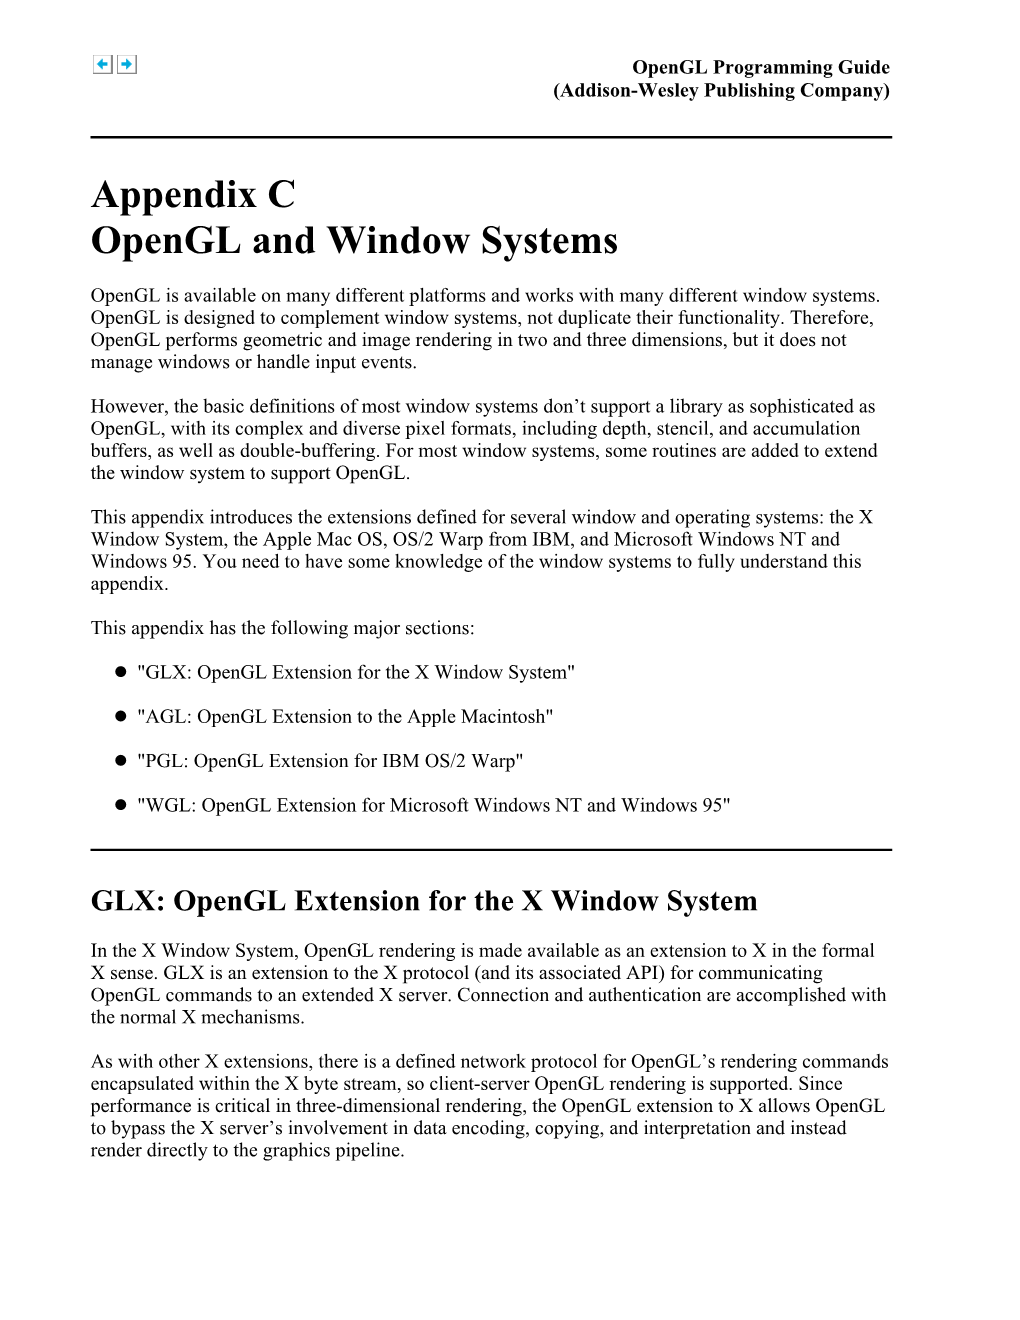 Appendix C Opengl and Window Systems